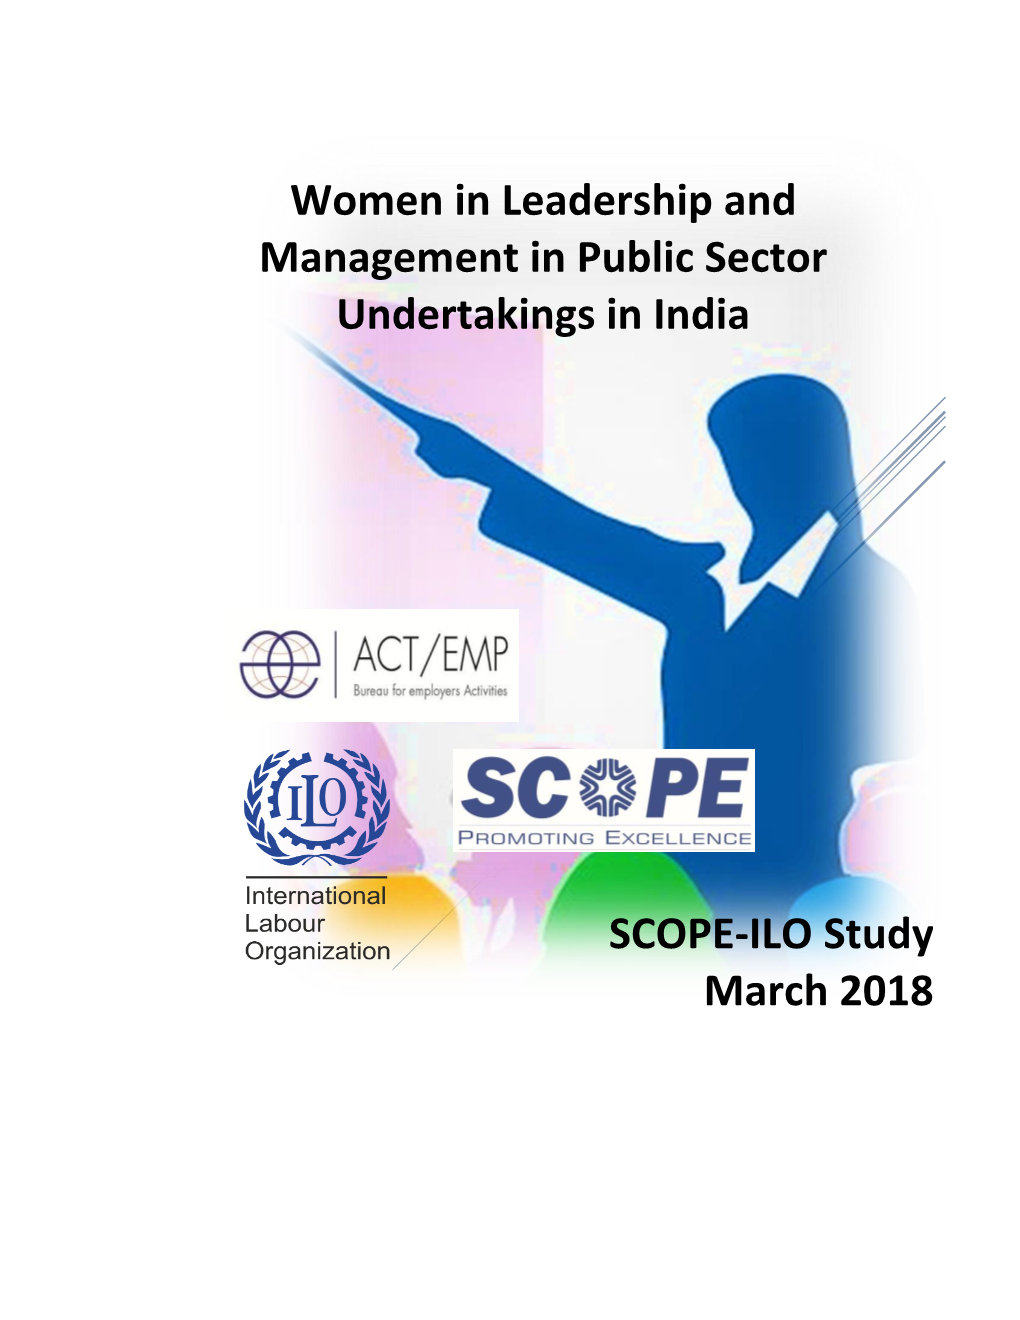 Women in Leadership and Management in Public Sector Undertakings in India